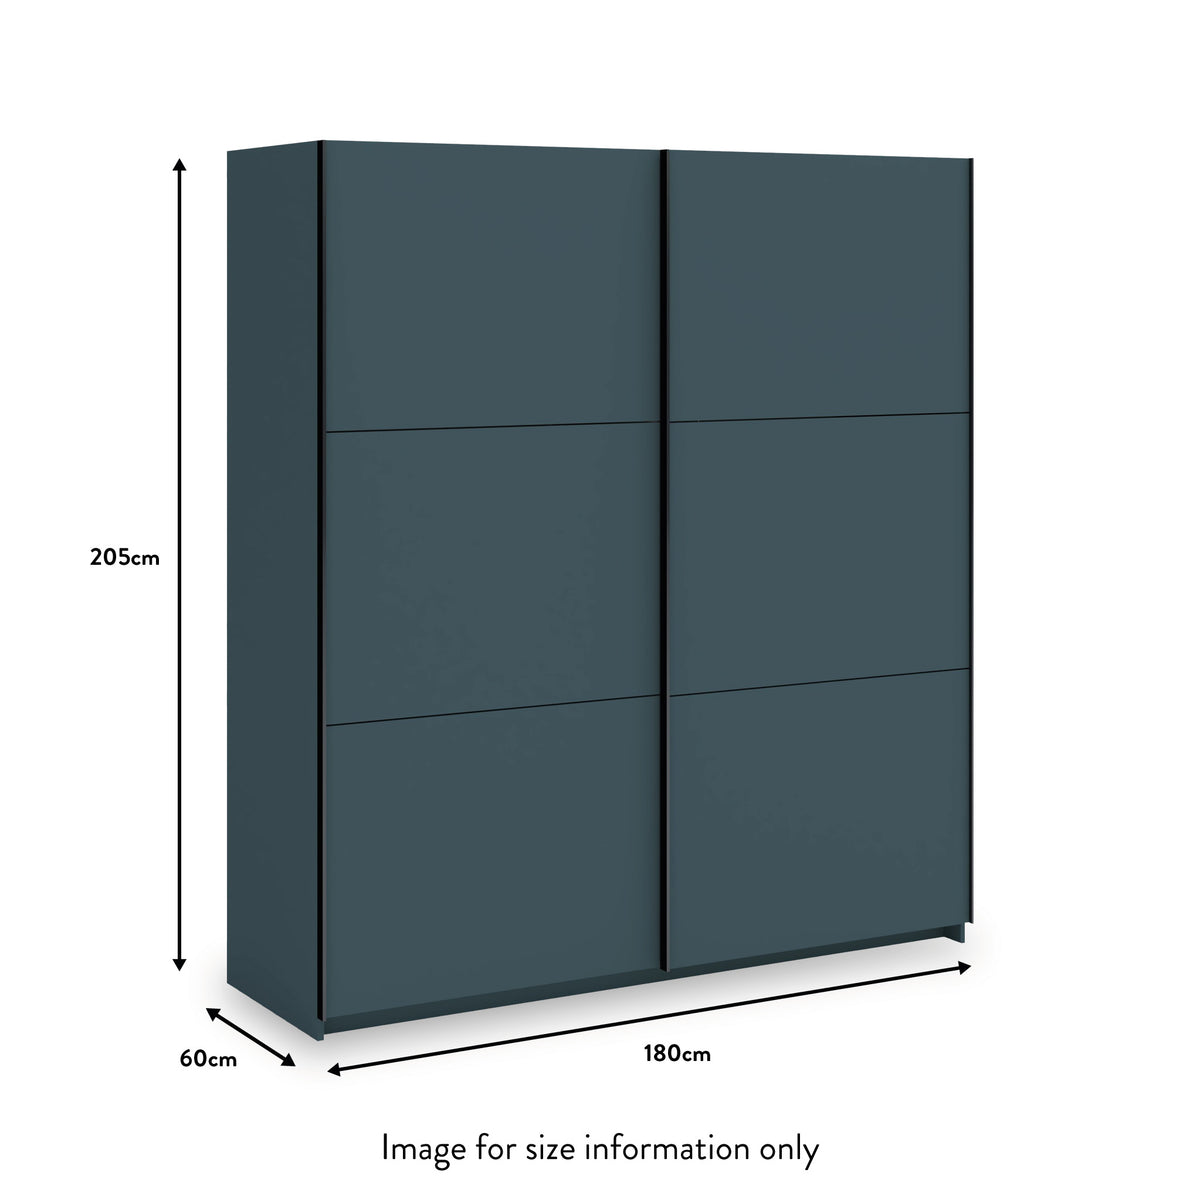 Holland Anthracite 180cm Sliding Double Wardrobe dimensions